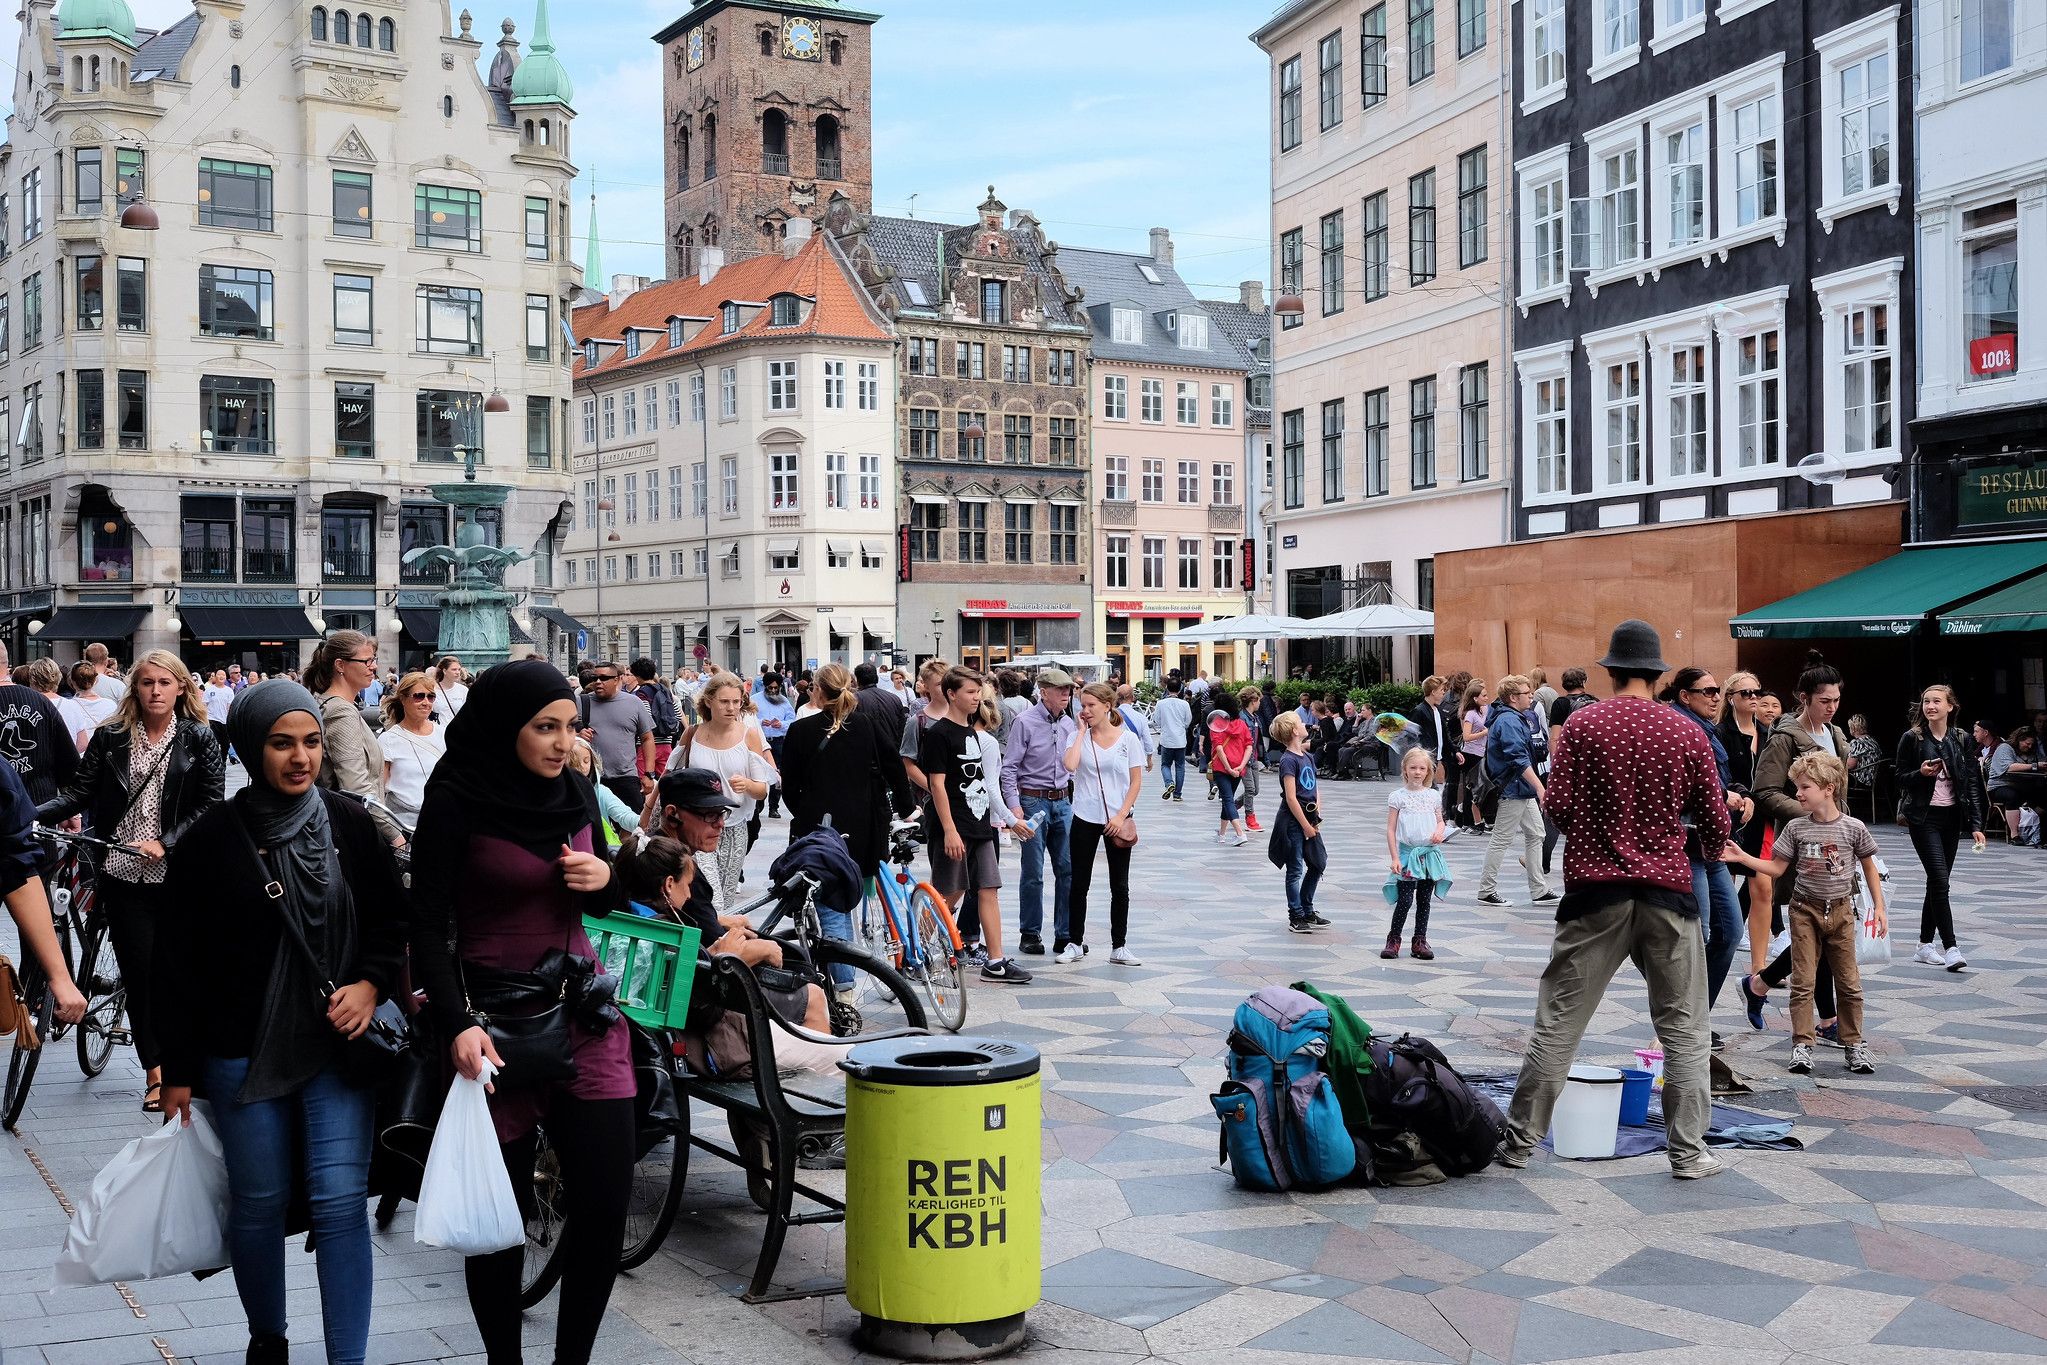 Local Round-up: Copenhagen likely to fire street sweepers